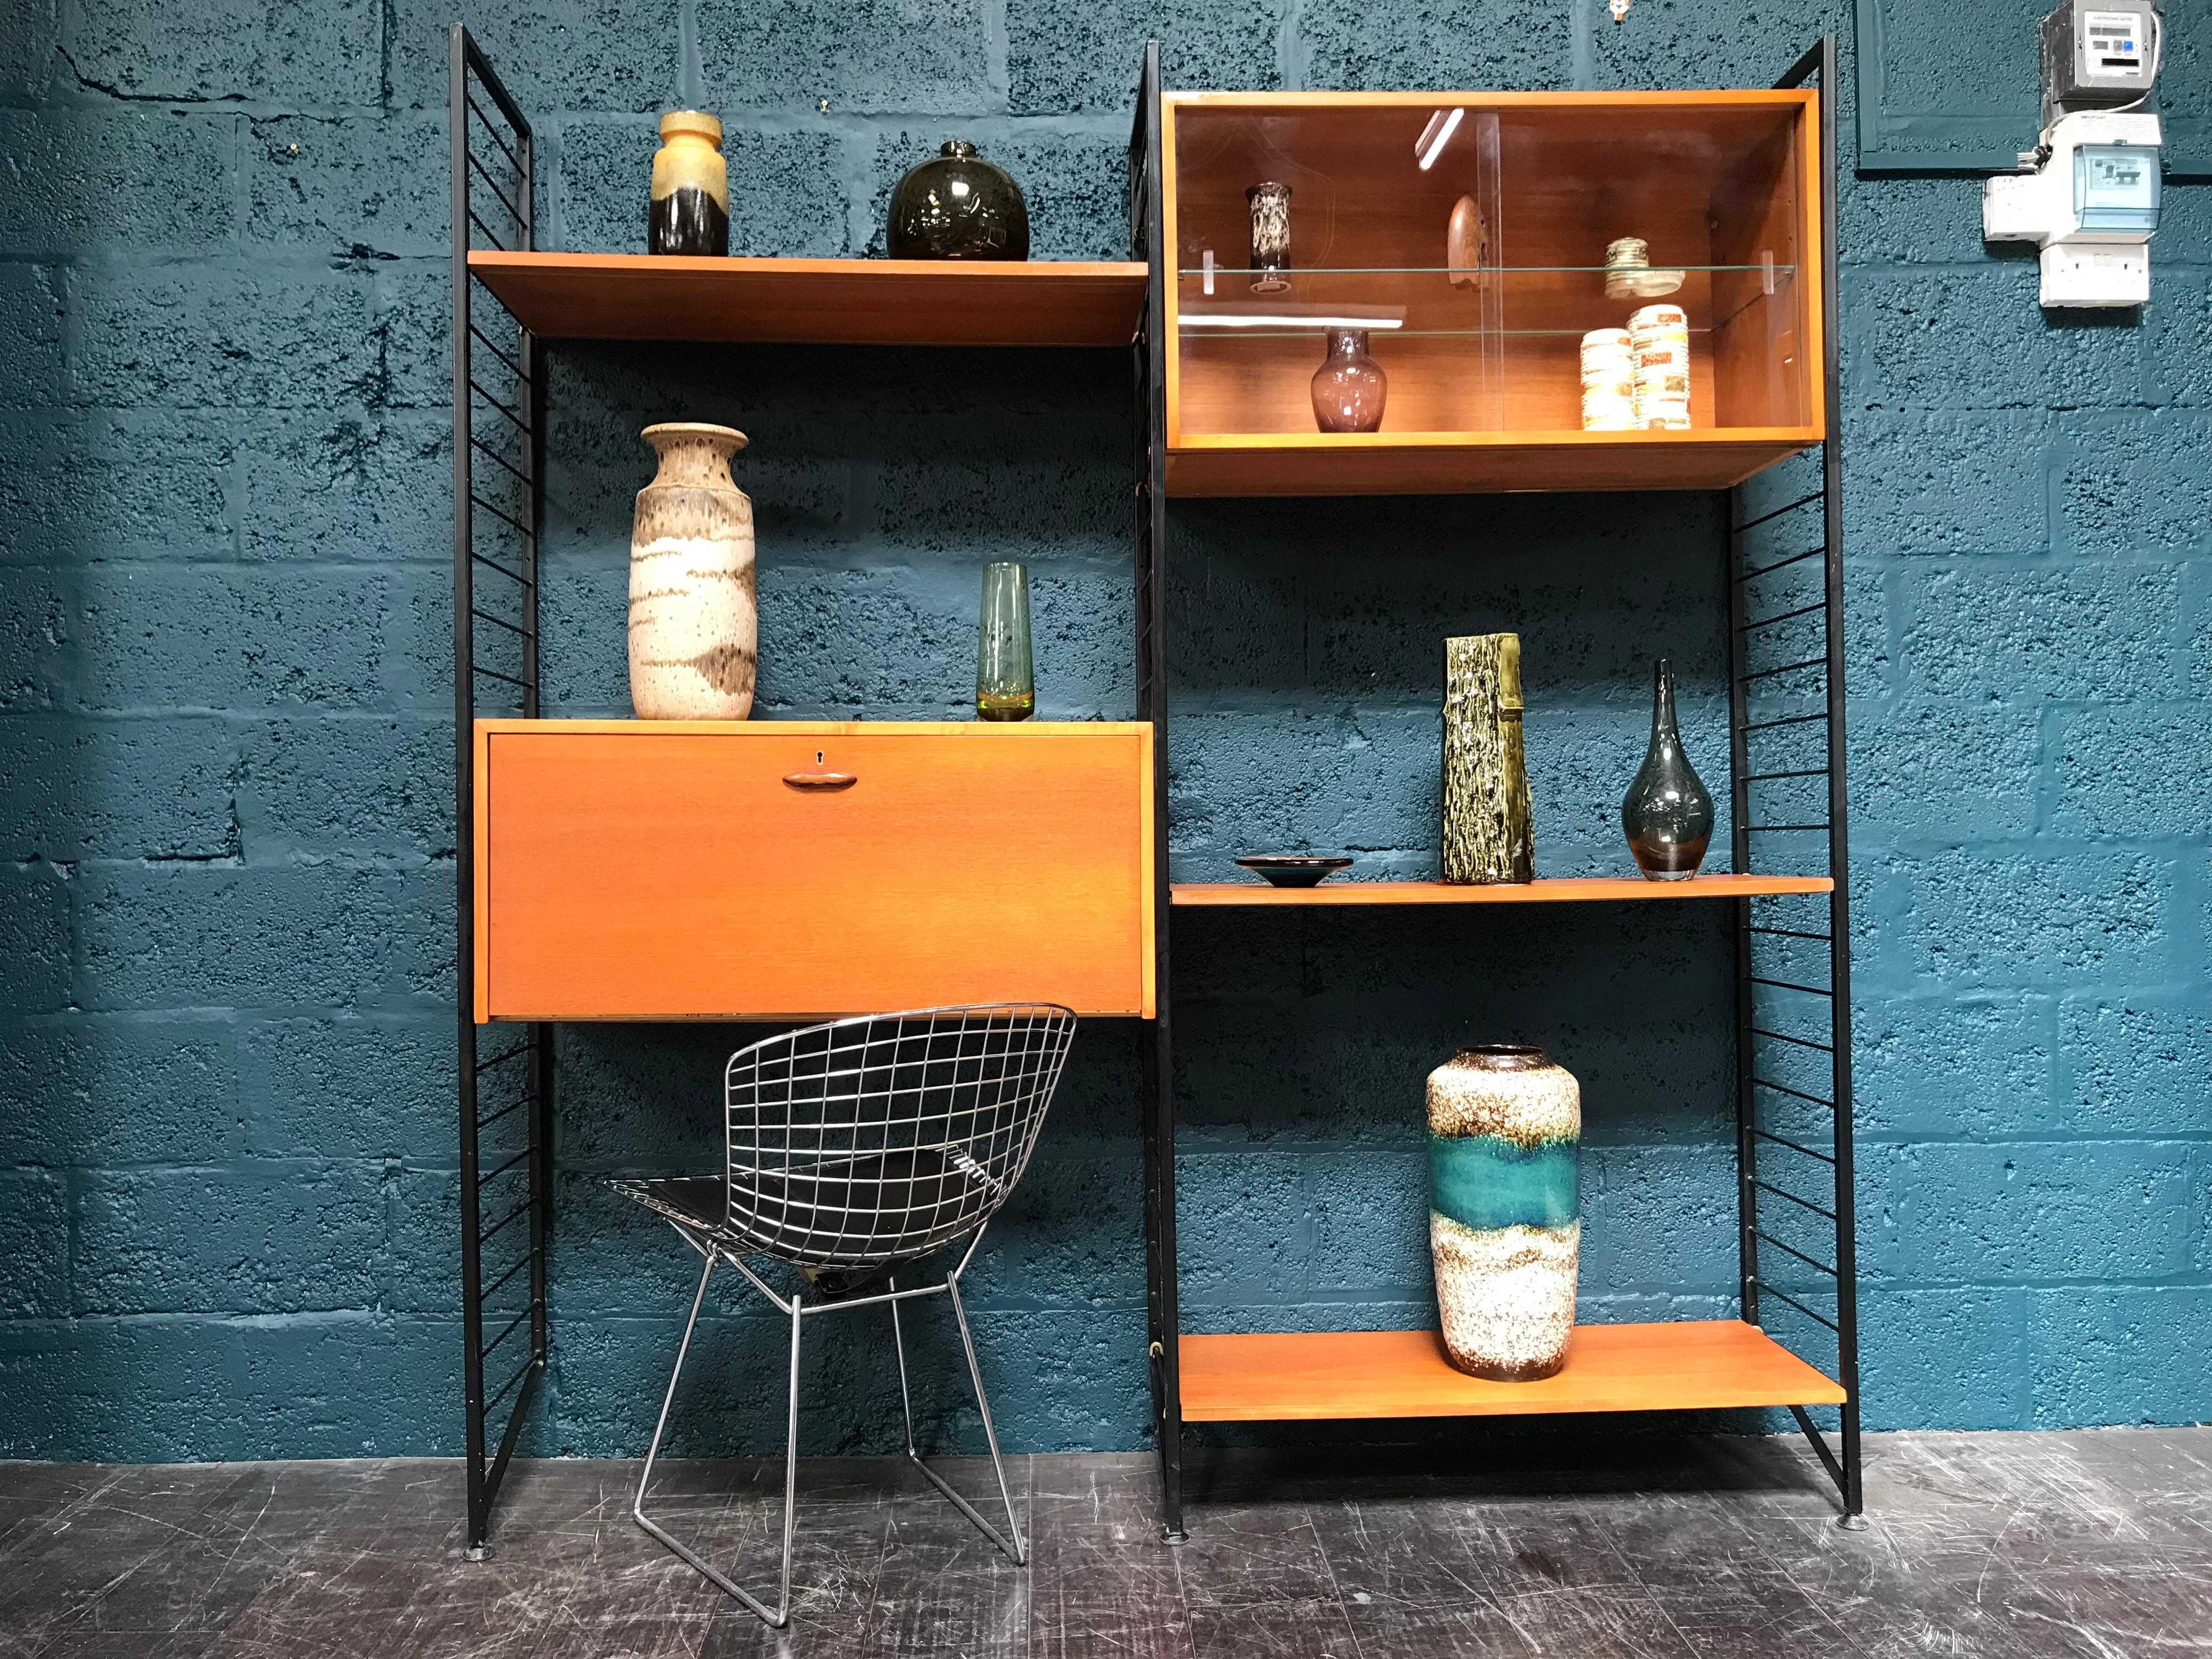 Stylish and functional, this is the classic Staples Ladderax mid century shelving system. The black metal uprights and easy removable supports, allow the teak cabinetry to be positioned wherever required. This is a very versatile piece of retro